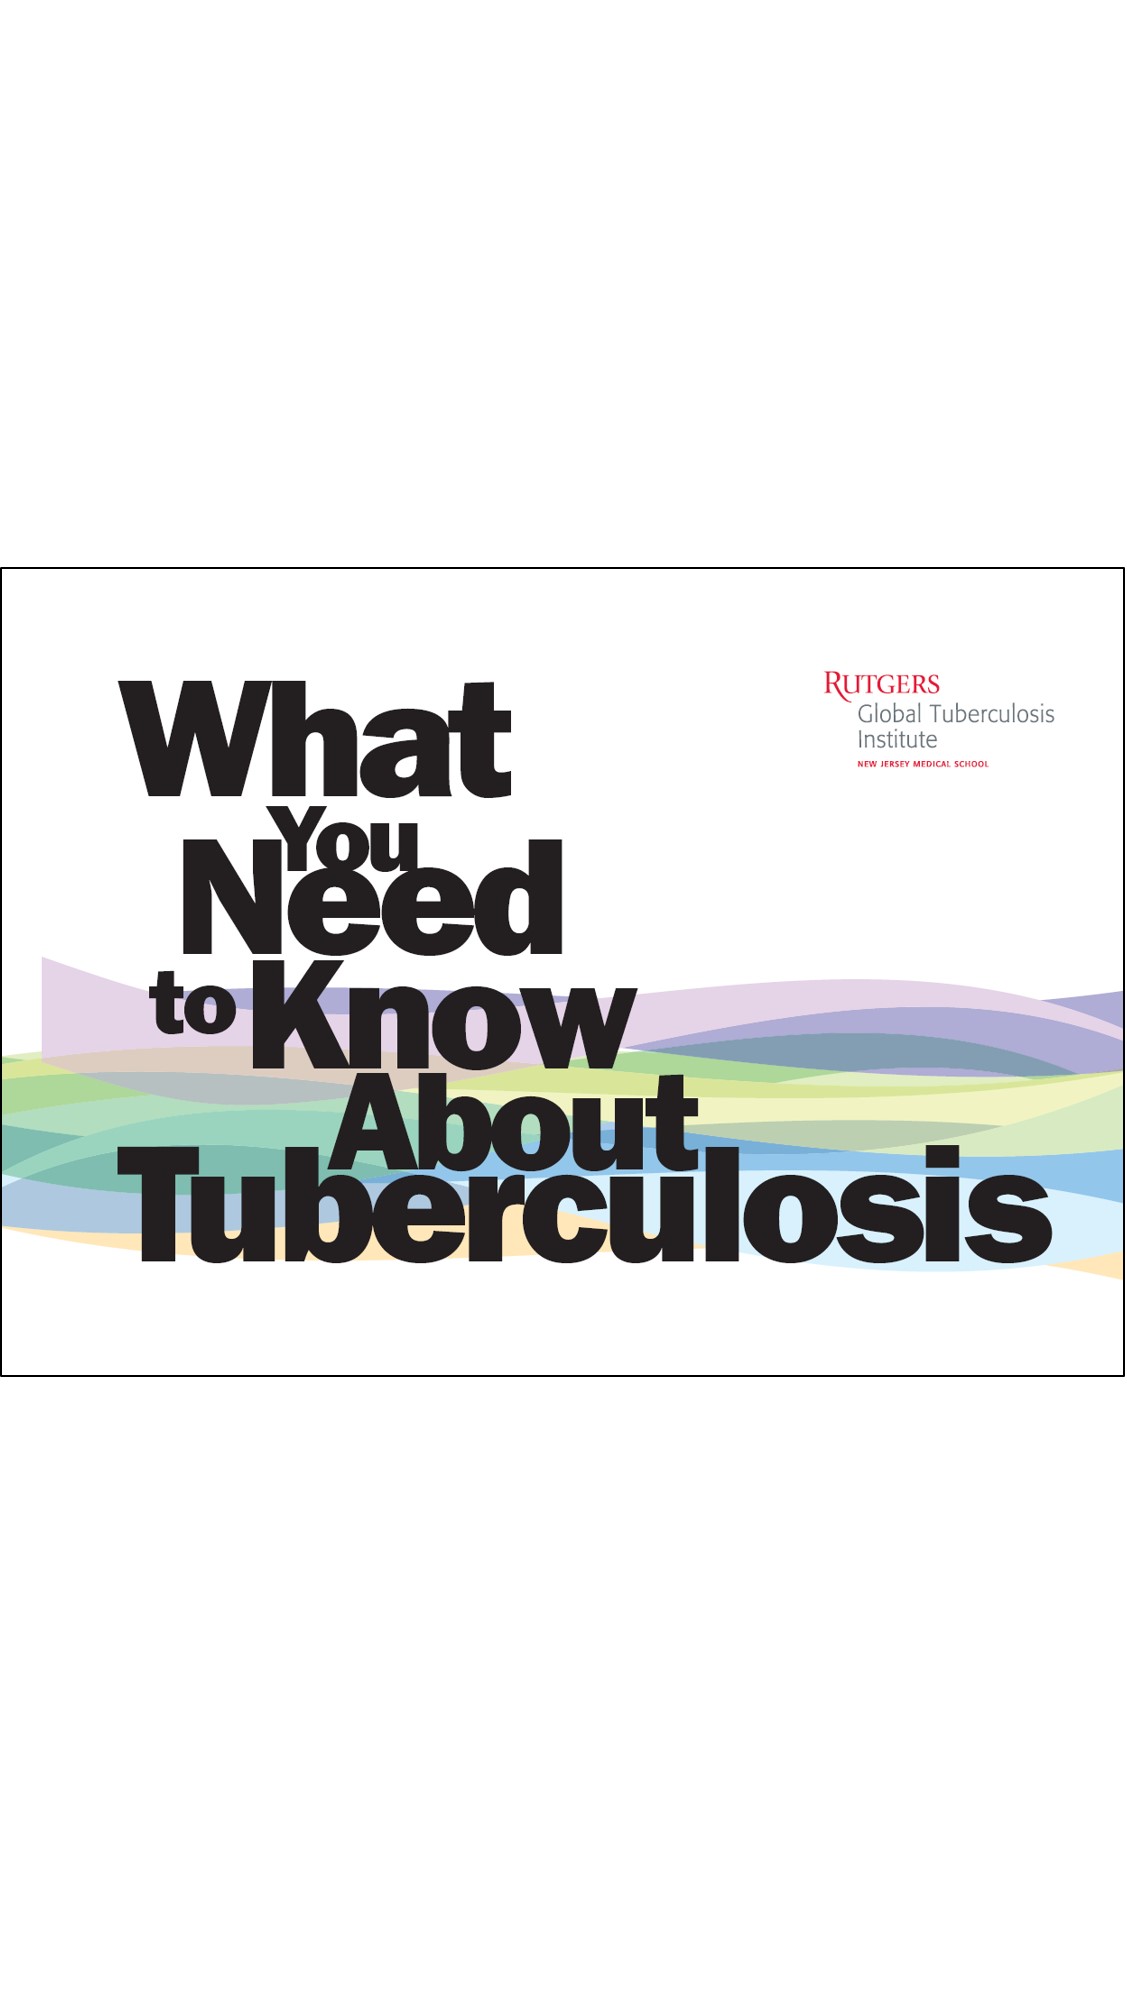 What You Need to Know About Tuberculosis